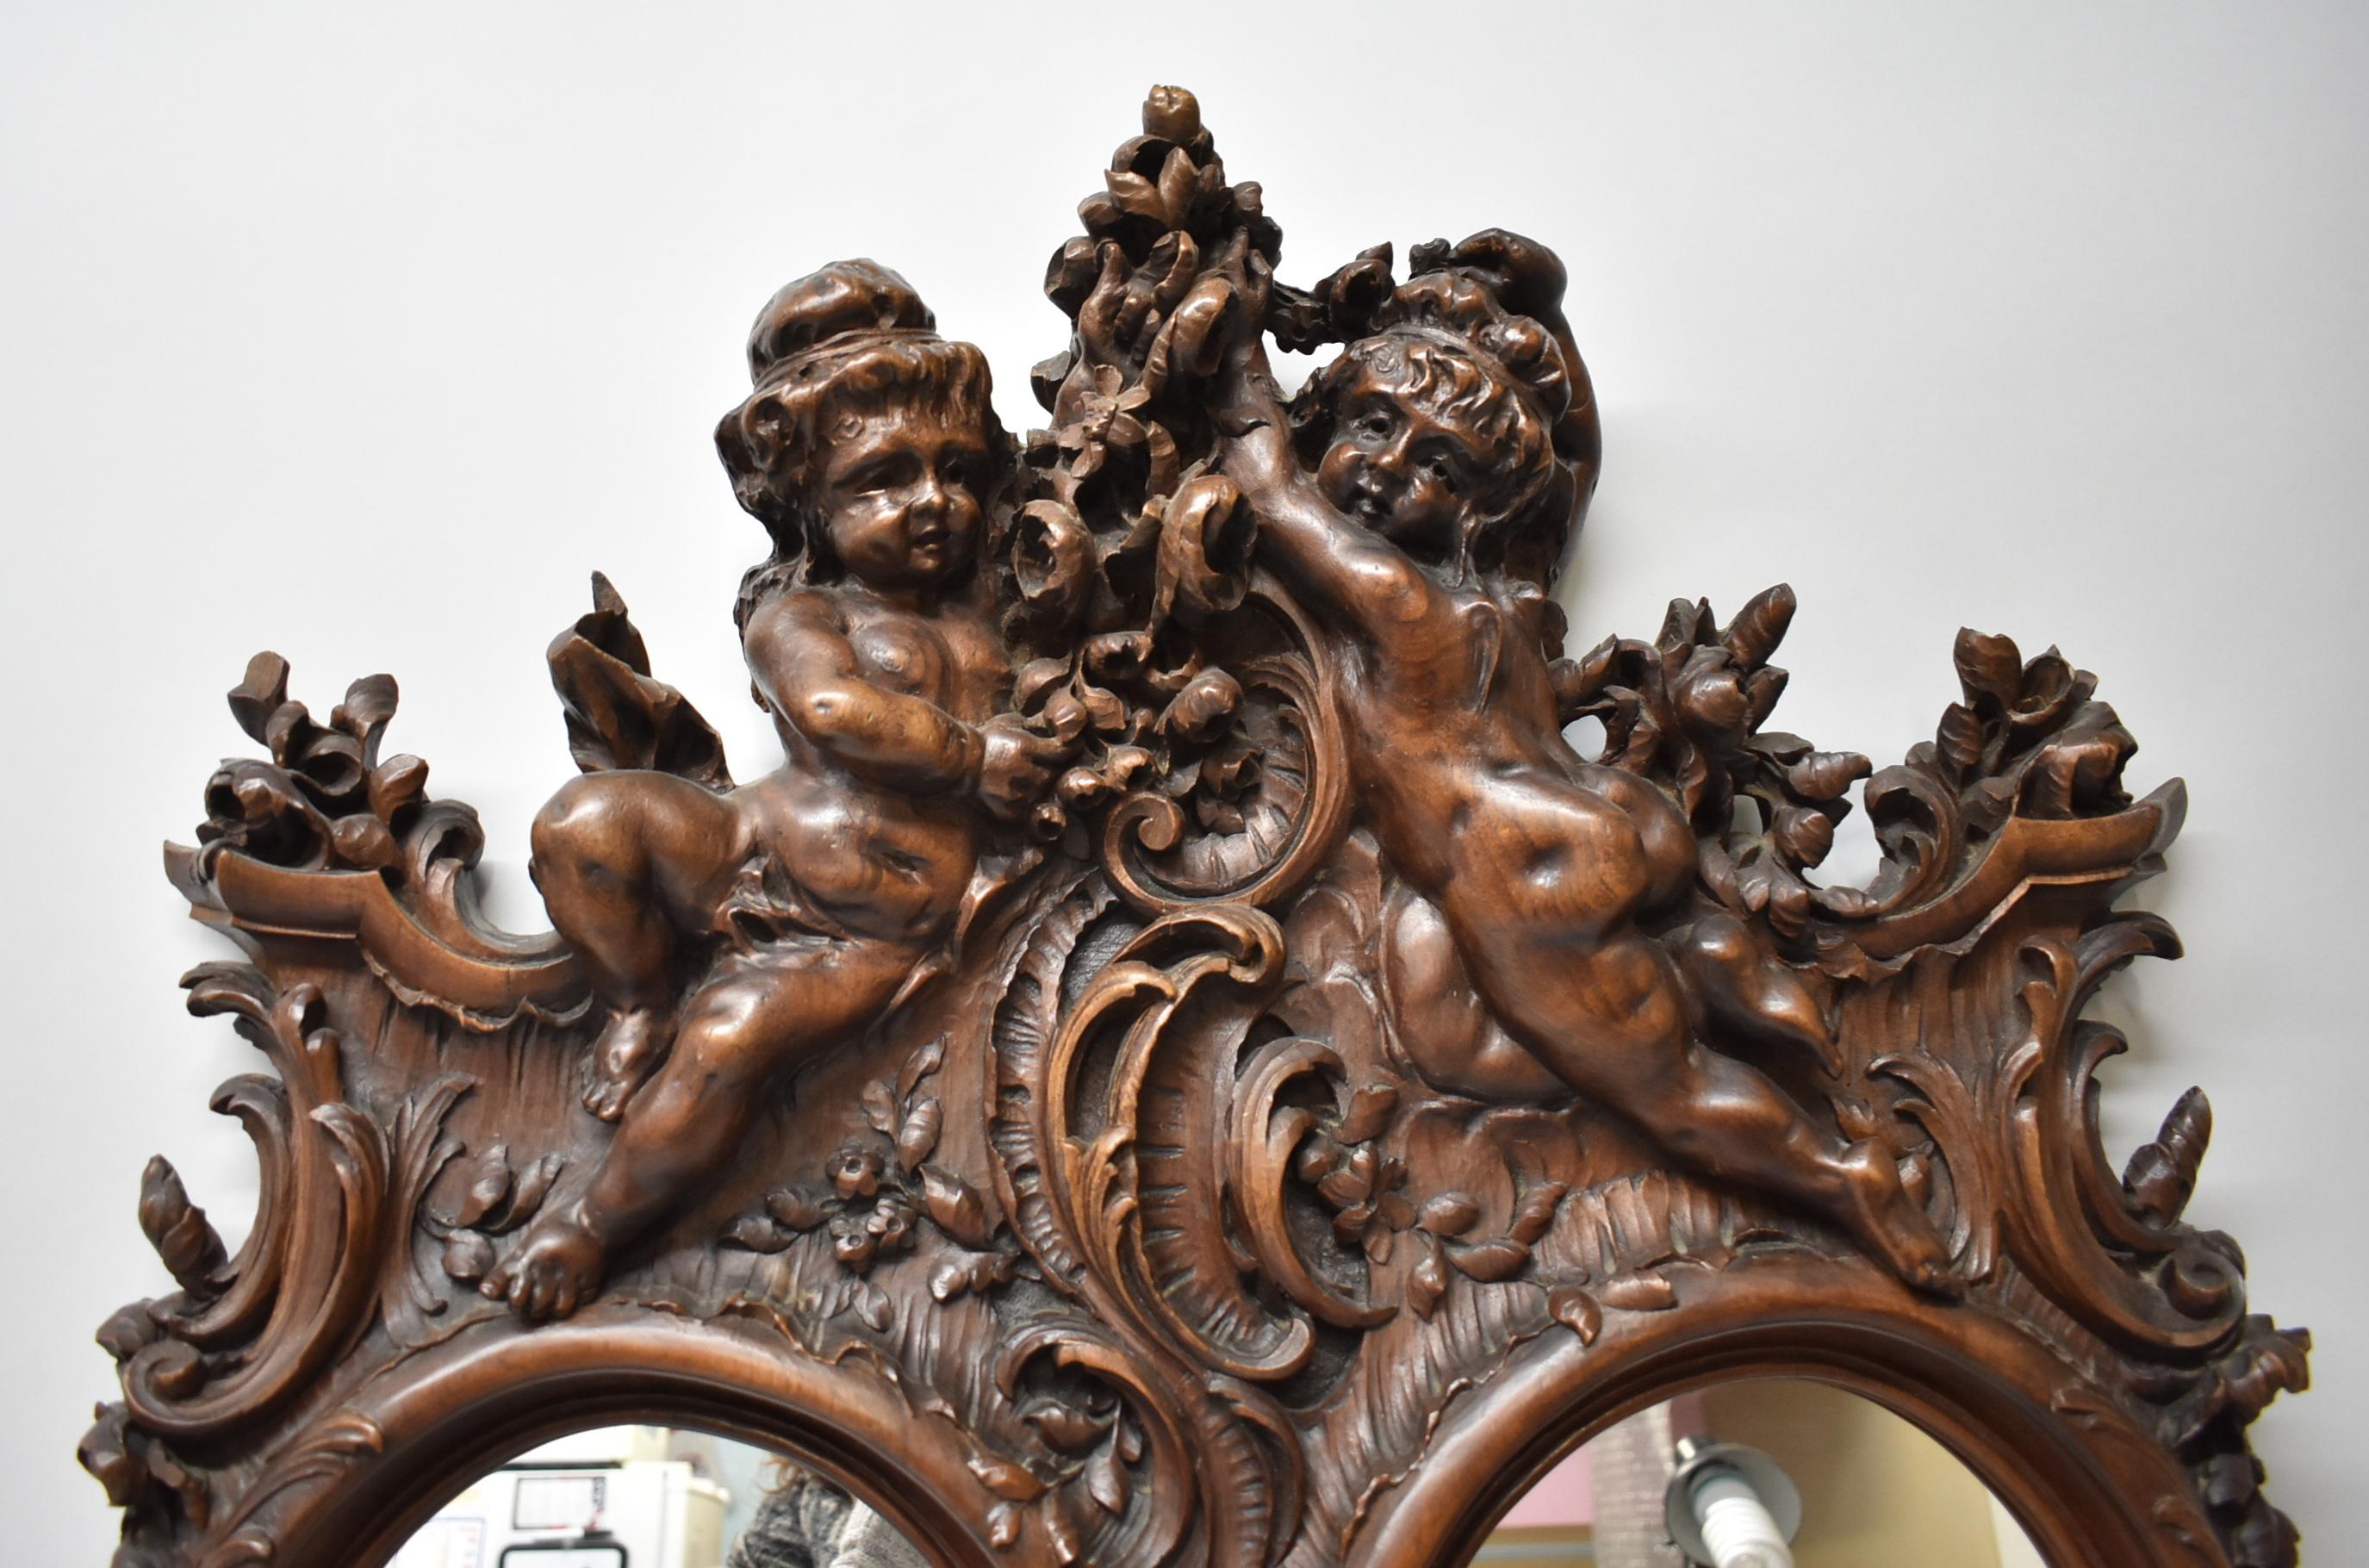 Heavily detailed carved walnut framed double oval mirror in Baroque style. Two carved cherubs grace the top and one winged cherub at the bottom of the frame. Floral details and scrolls accent the surrounding areas. Small area of carving missing as